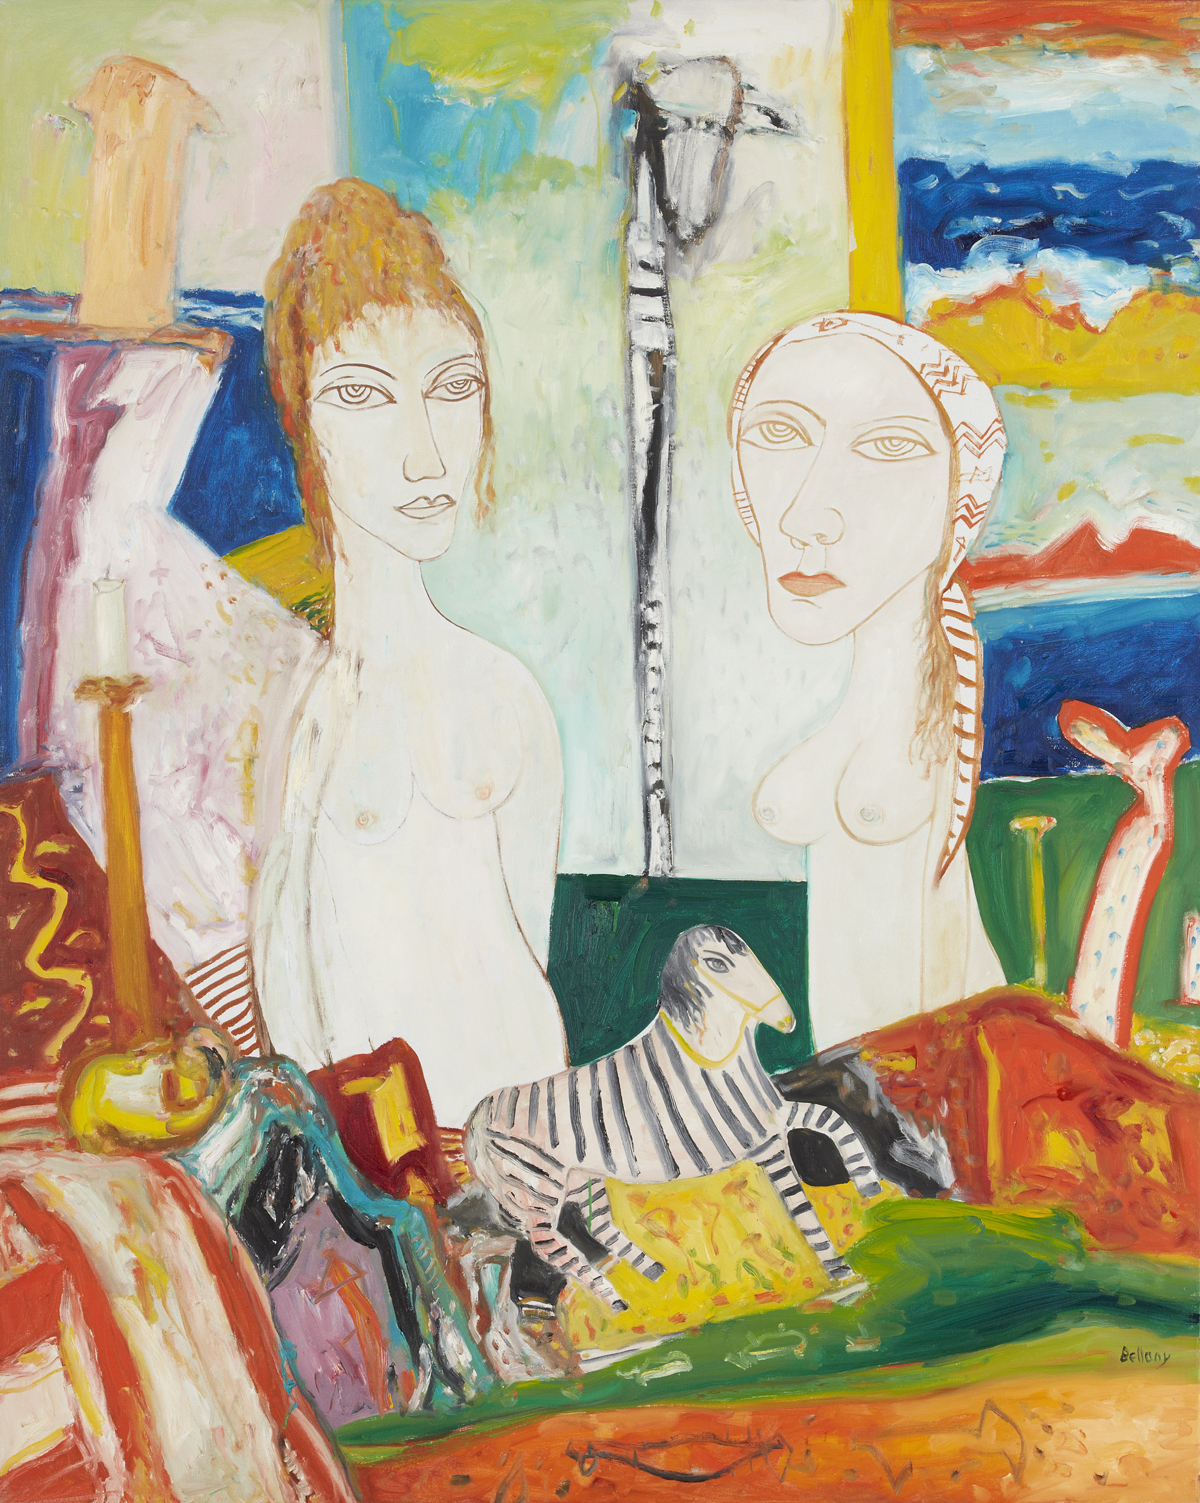 Reverie (1999), Oil on Canvas, 60 x 48 inches